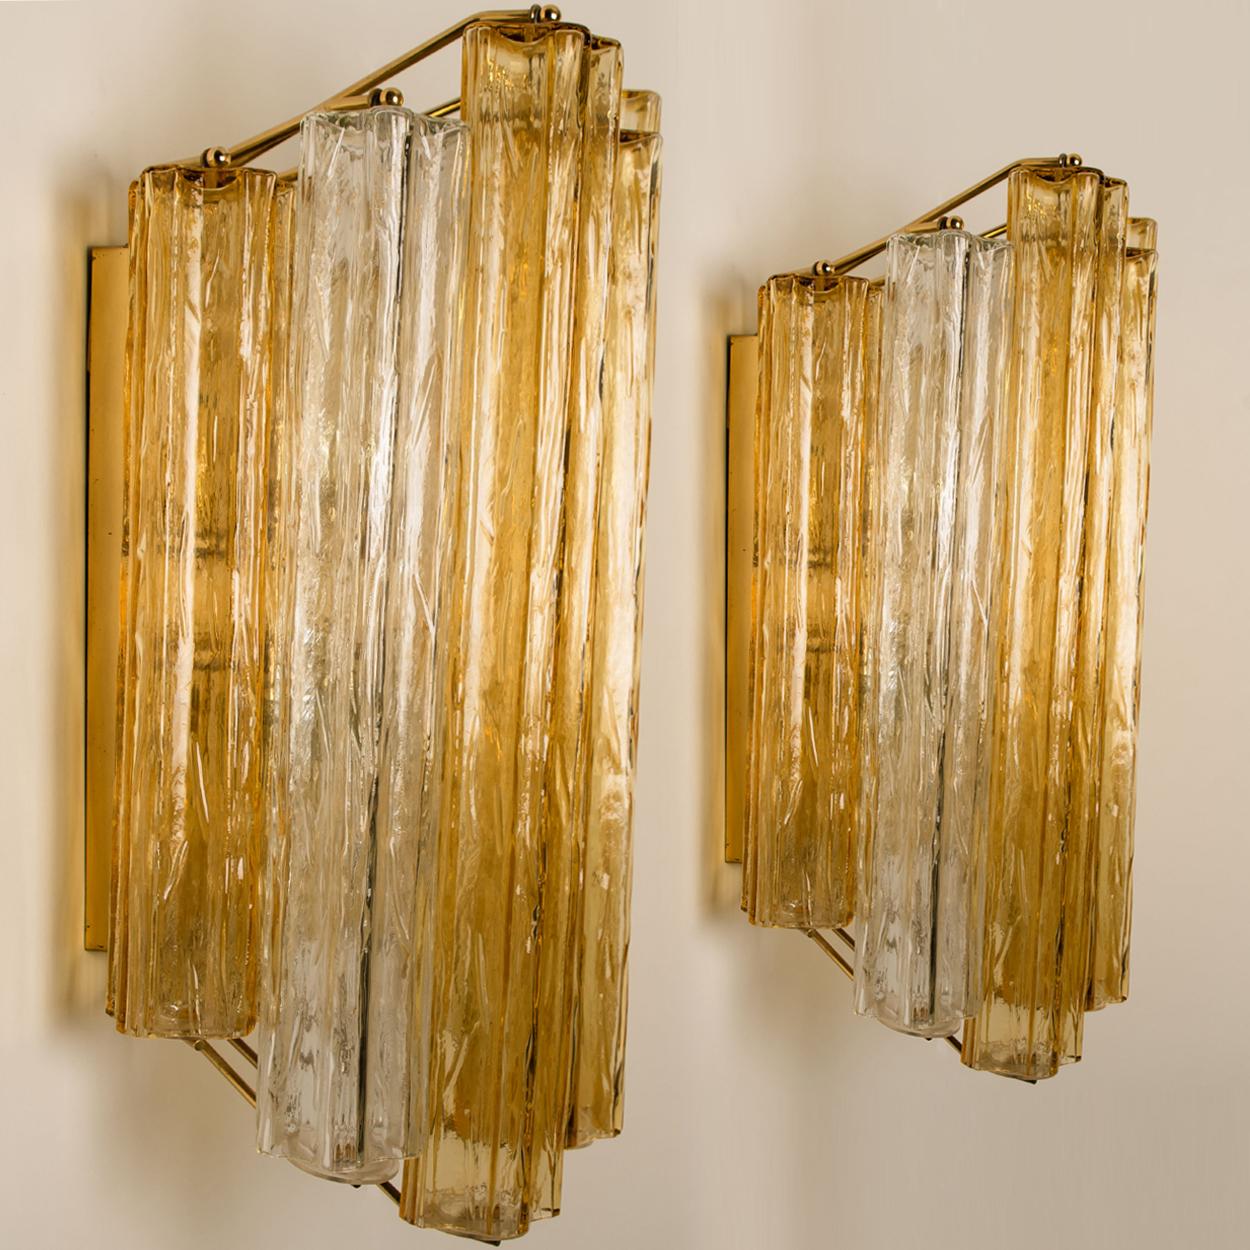 2 of the 2 Extra Large Wall Sconces or Wall Lights Murano Glass, Barovier & Toso 1